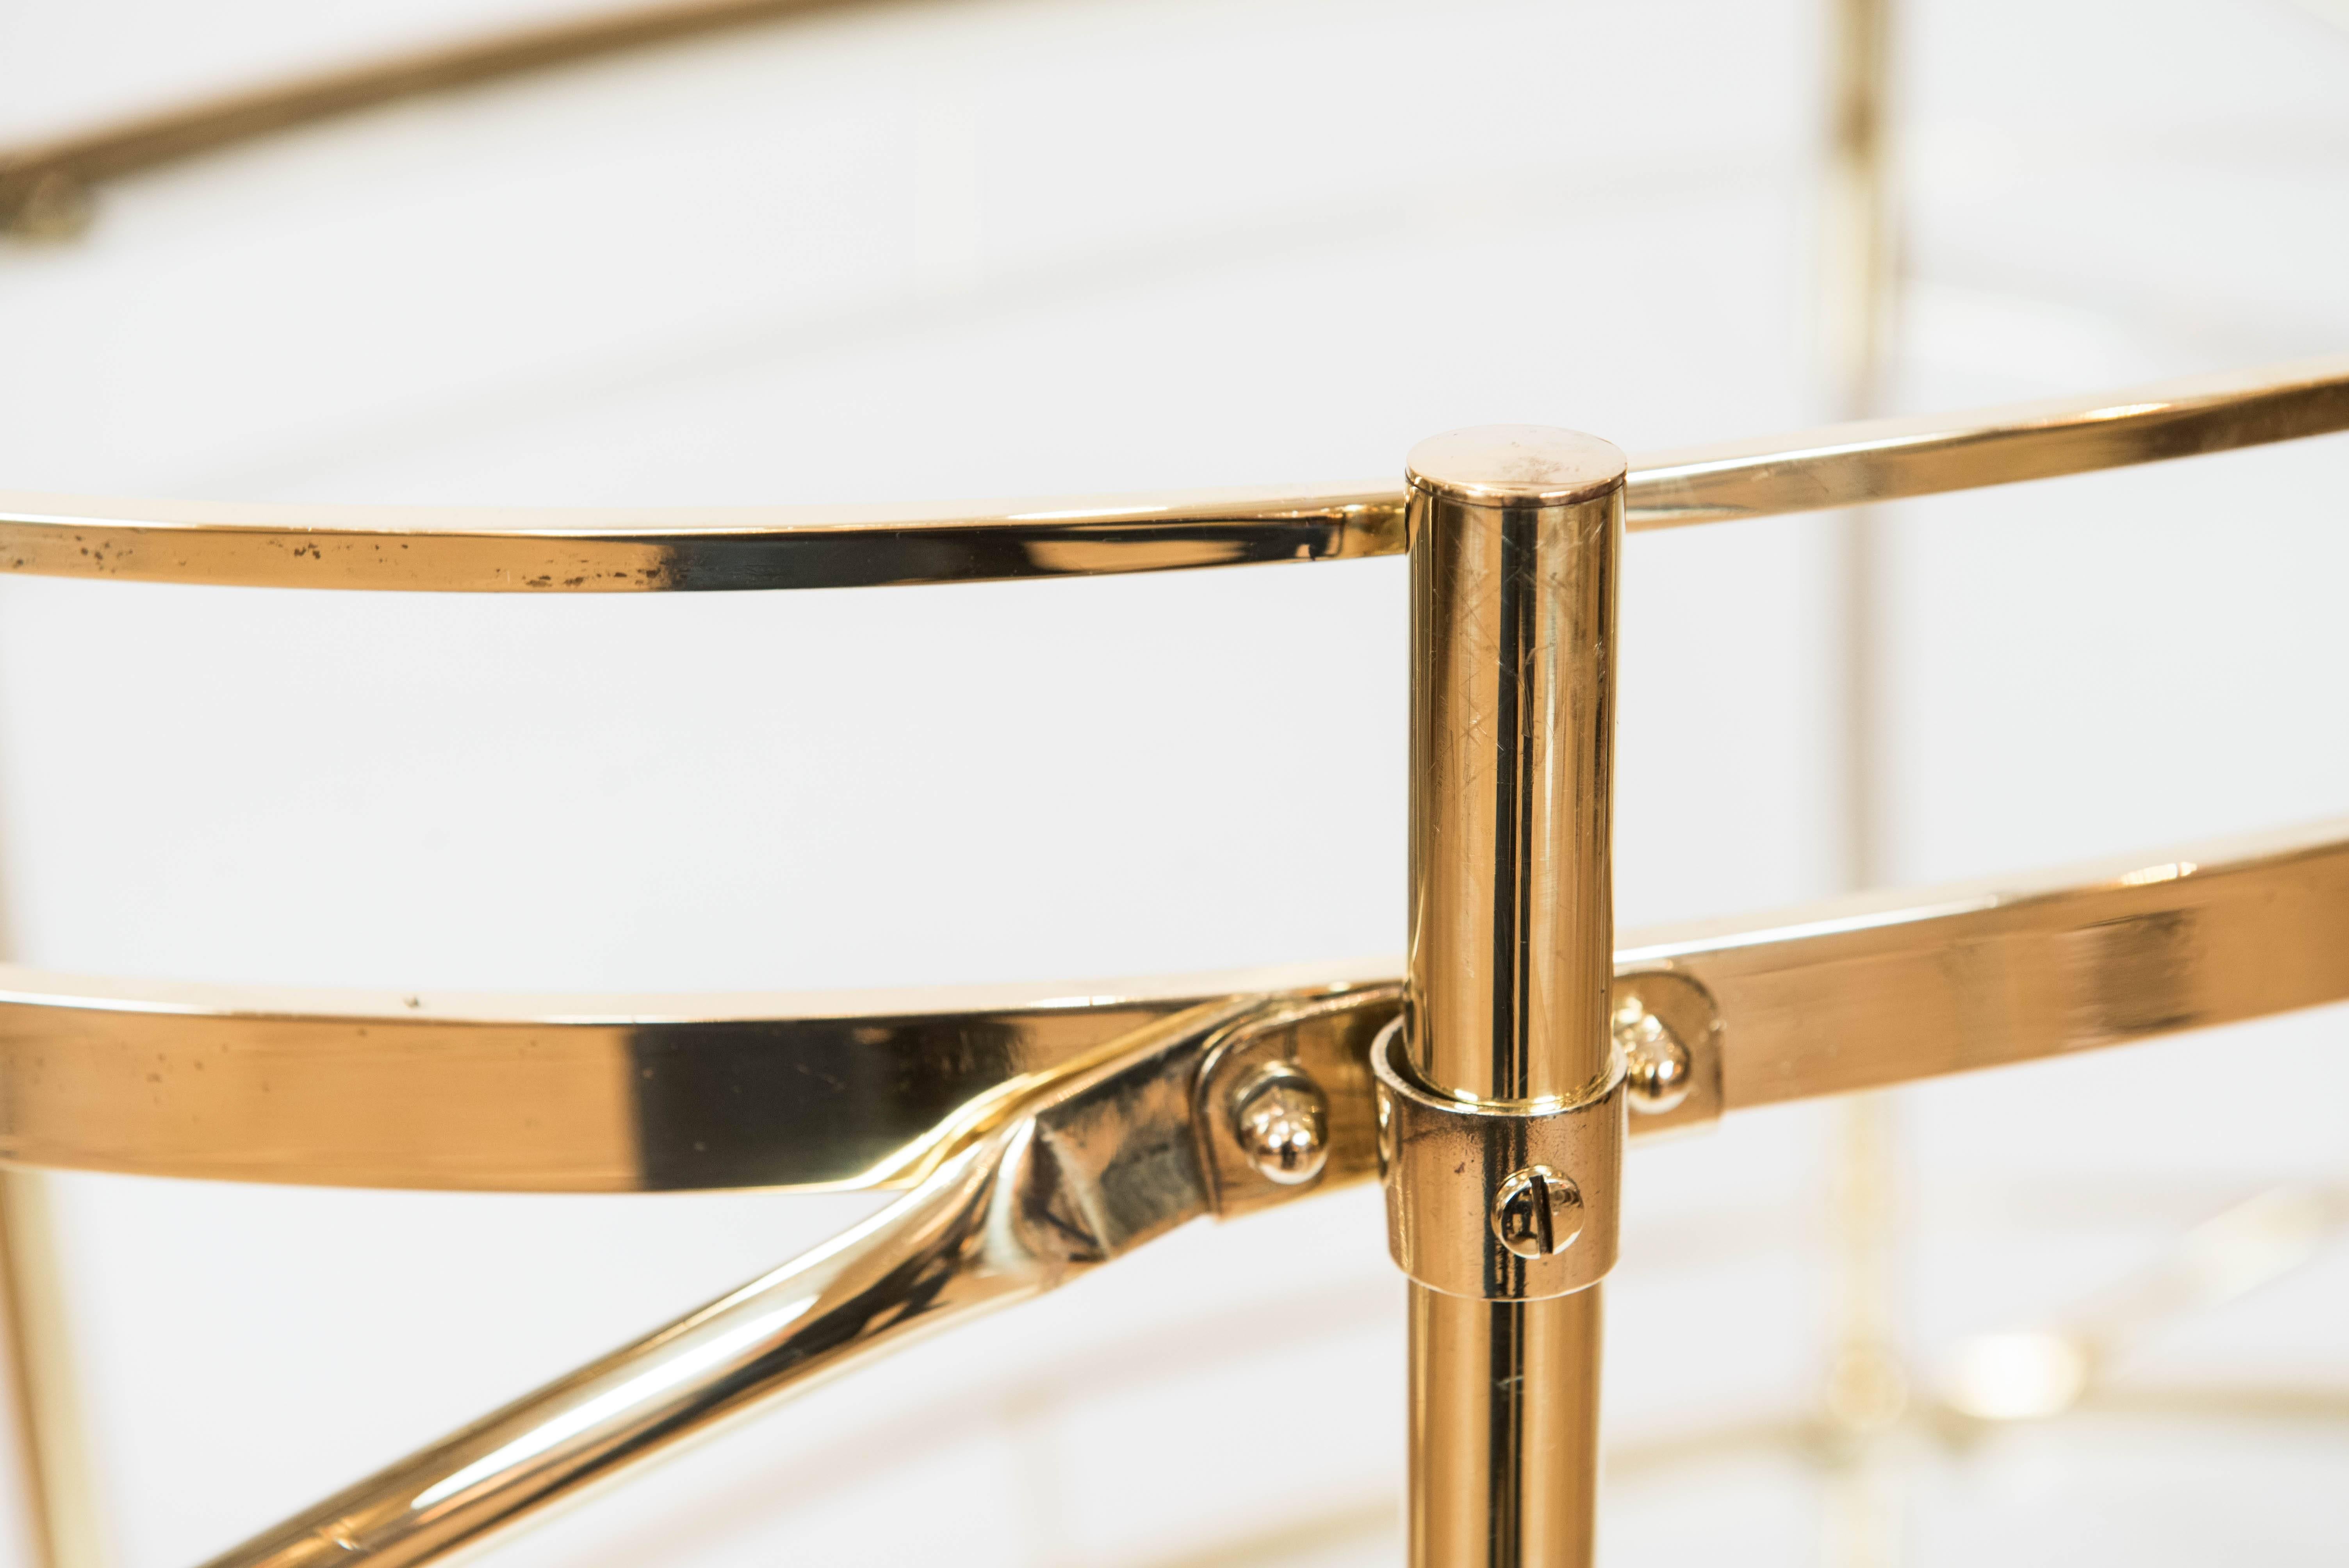 This elegant and unique solid brass bar cart with hard acrylic castors exudes
style and opulence. It has been polished to a new shine but it will age gracefully with time.